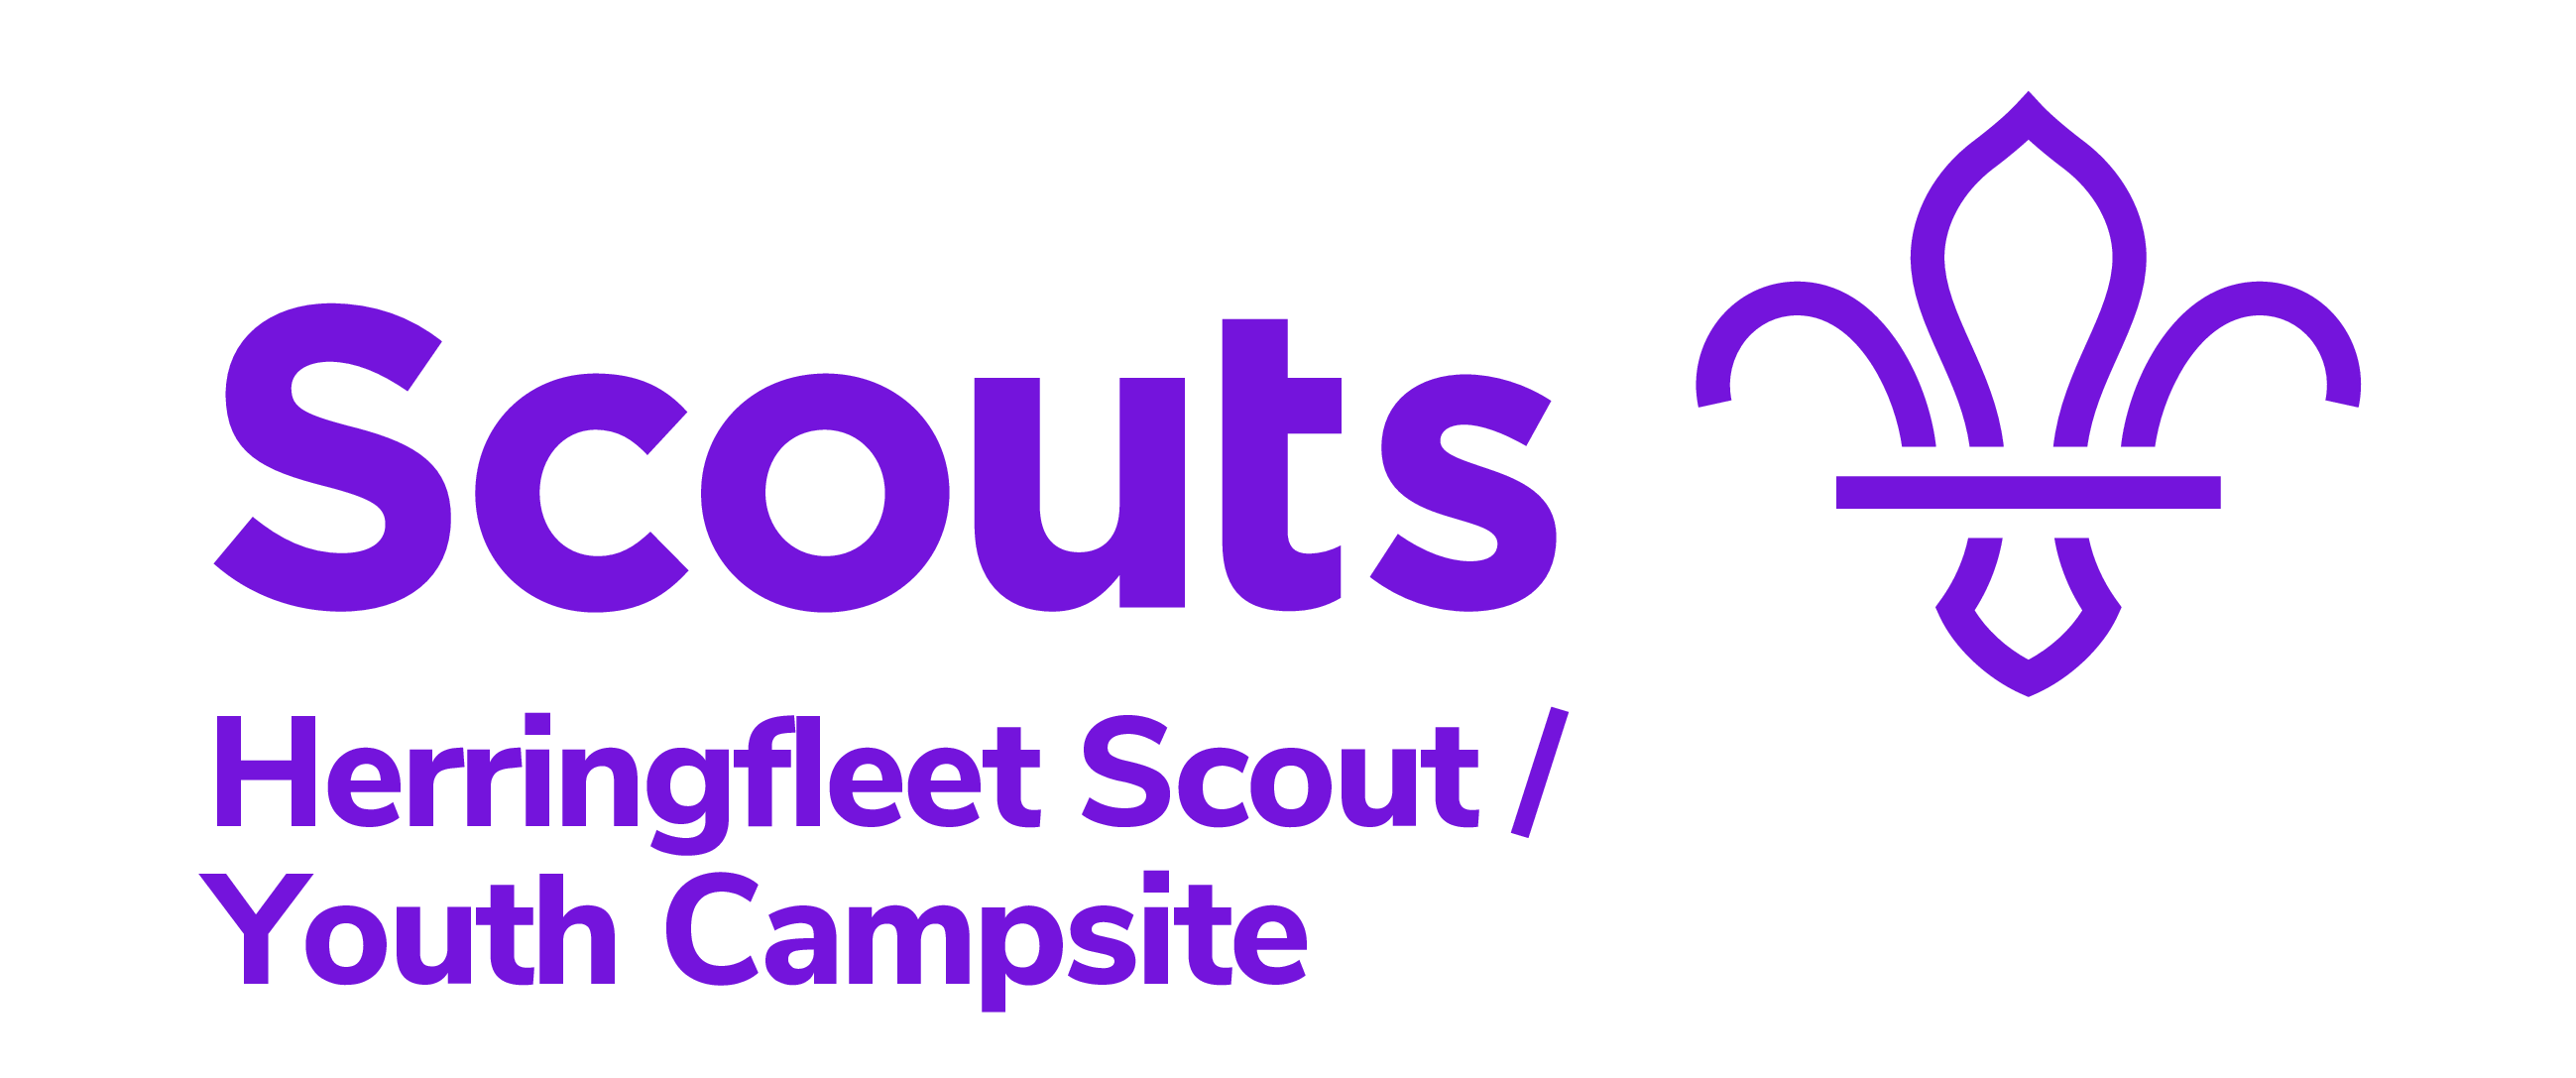 our-campfire-herringfleet-scout-youth-campsite